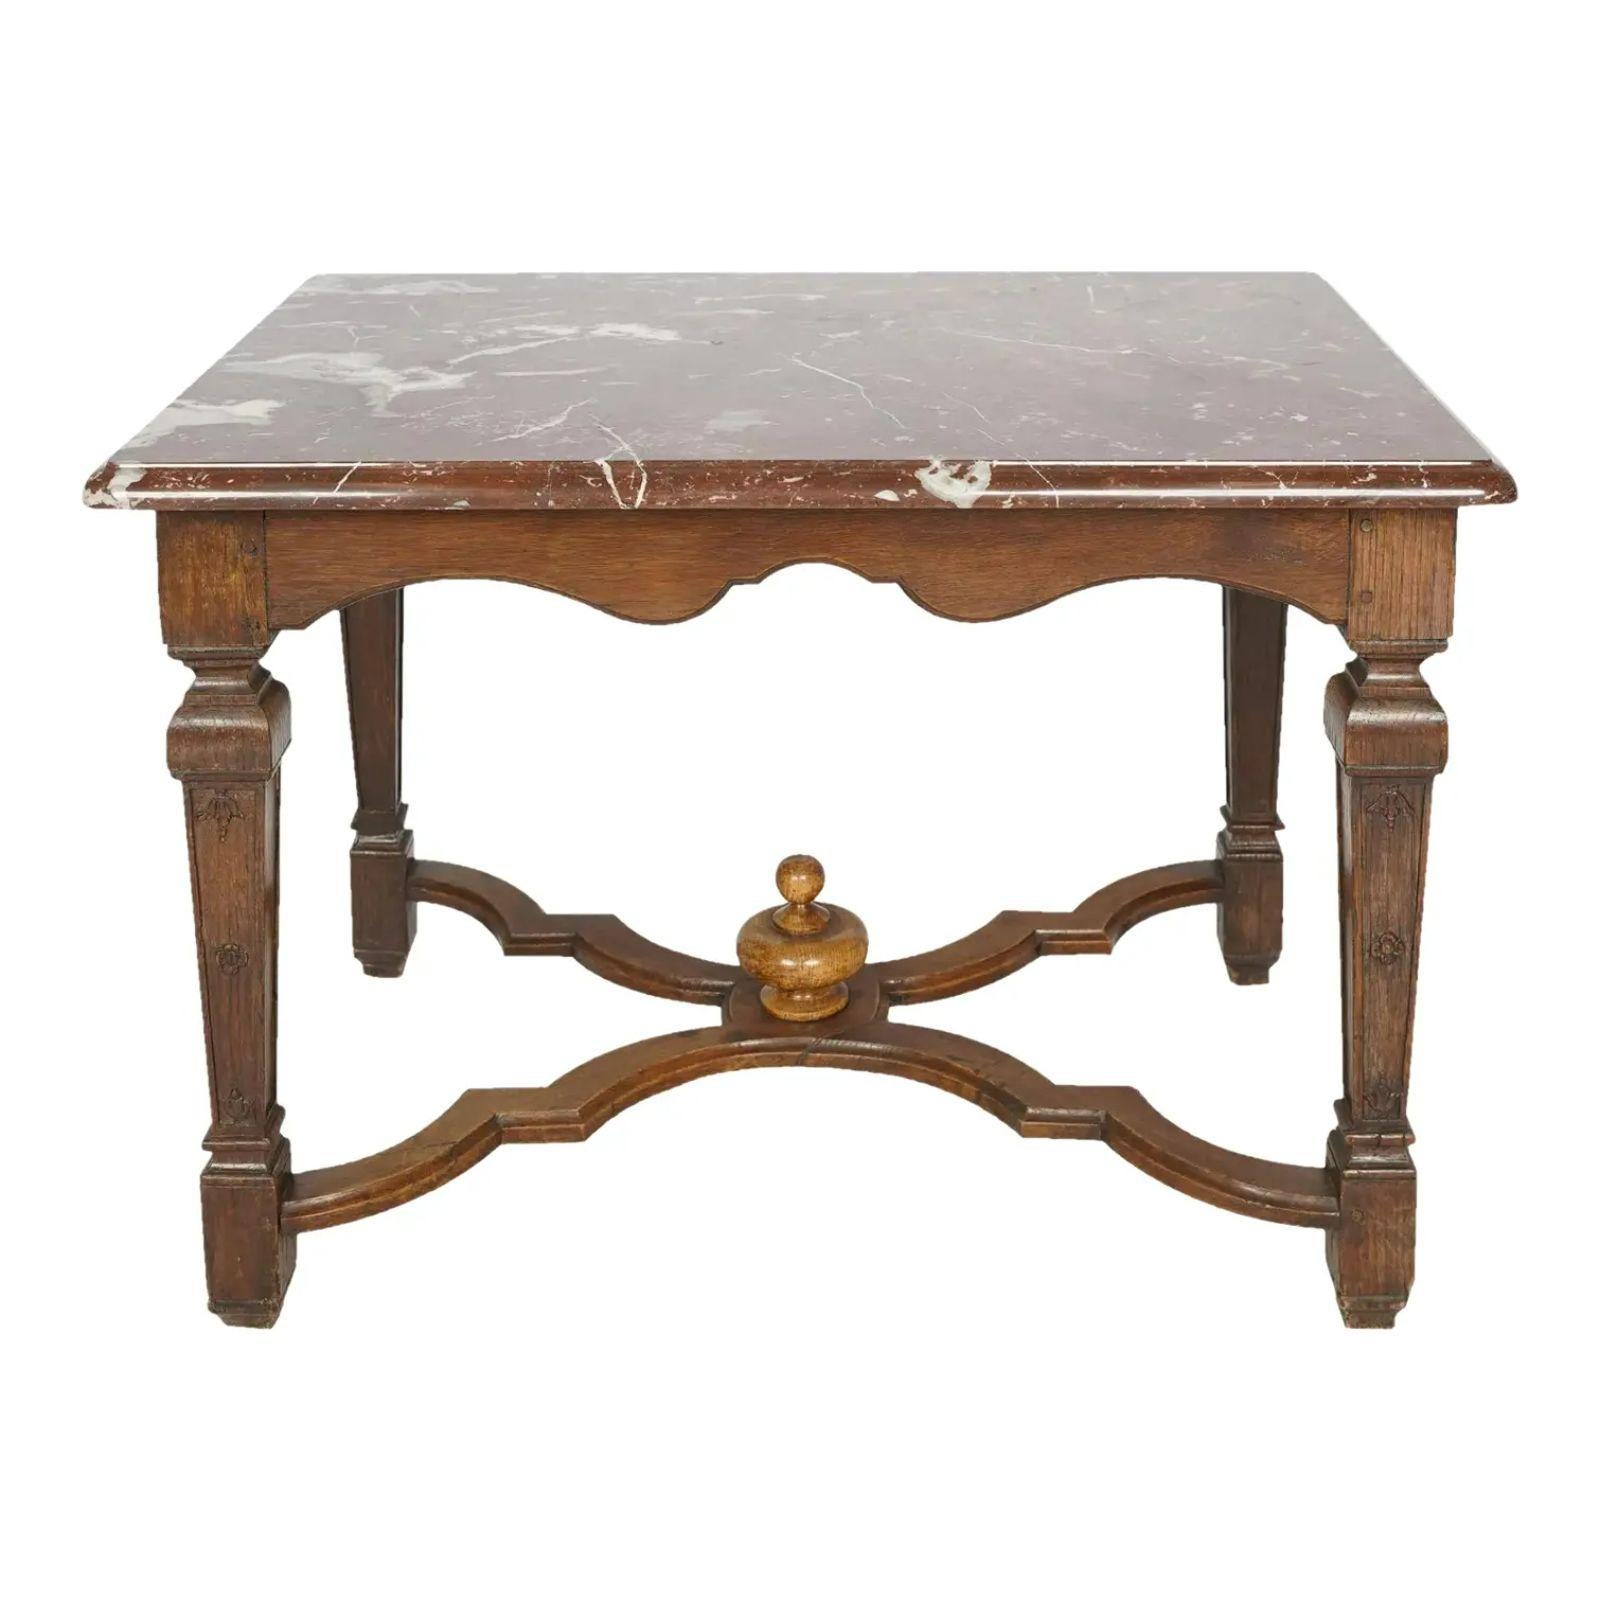 Antique Regence Style Oak & Marble Table, Early 19 Century For Sale